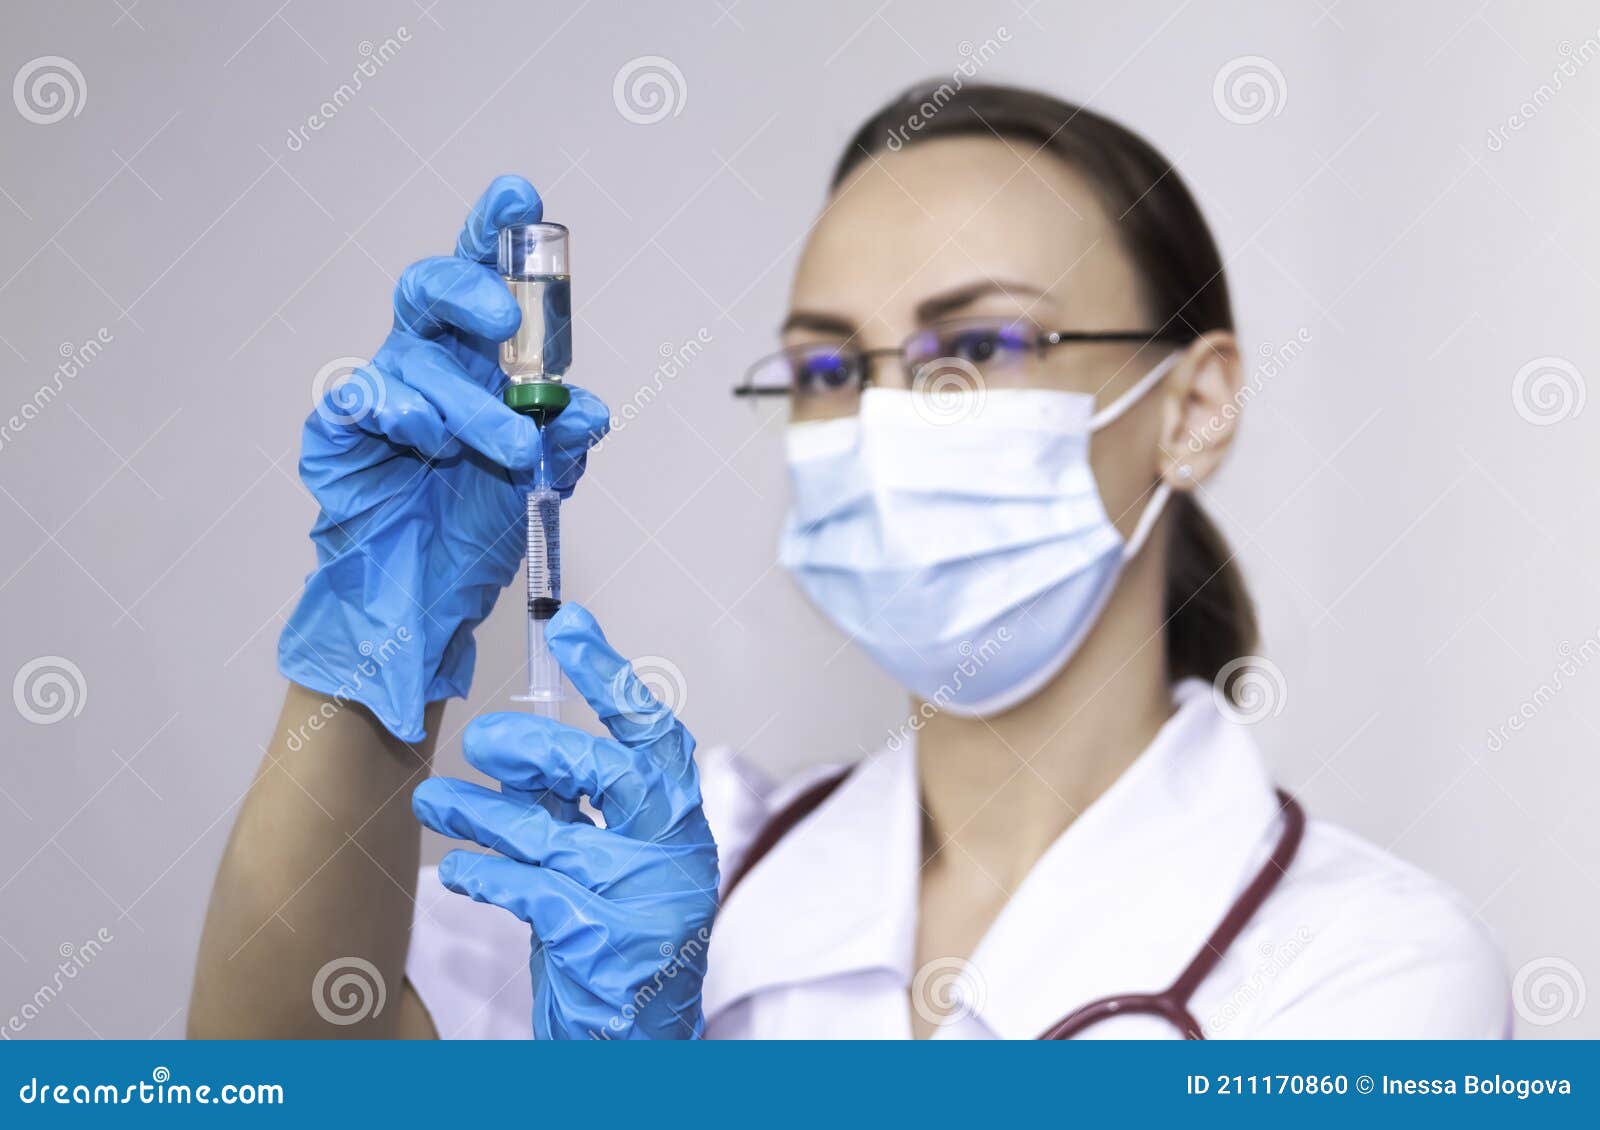 a nurse wearing protective gloves and a mask dials a vaccine into a syringe, the concept of vaccinating the population